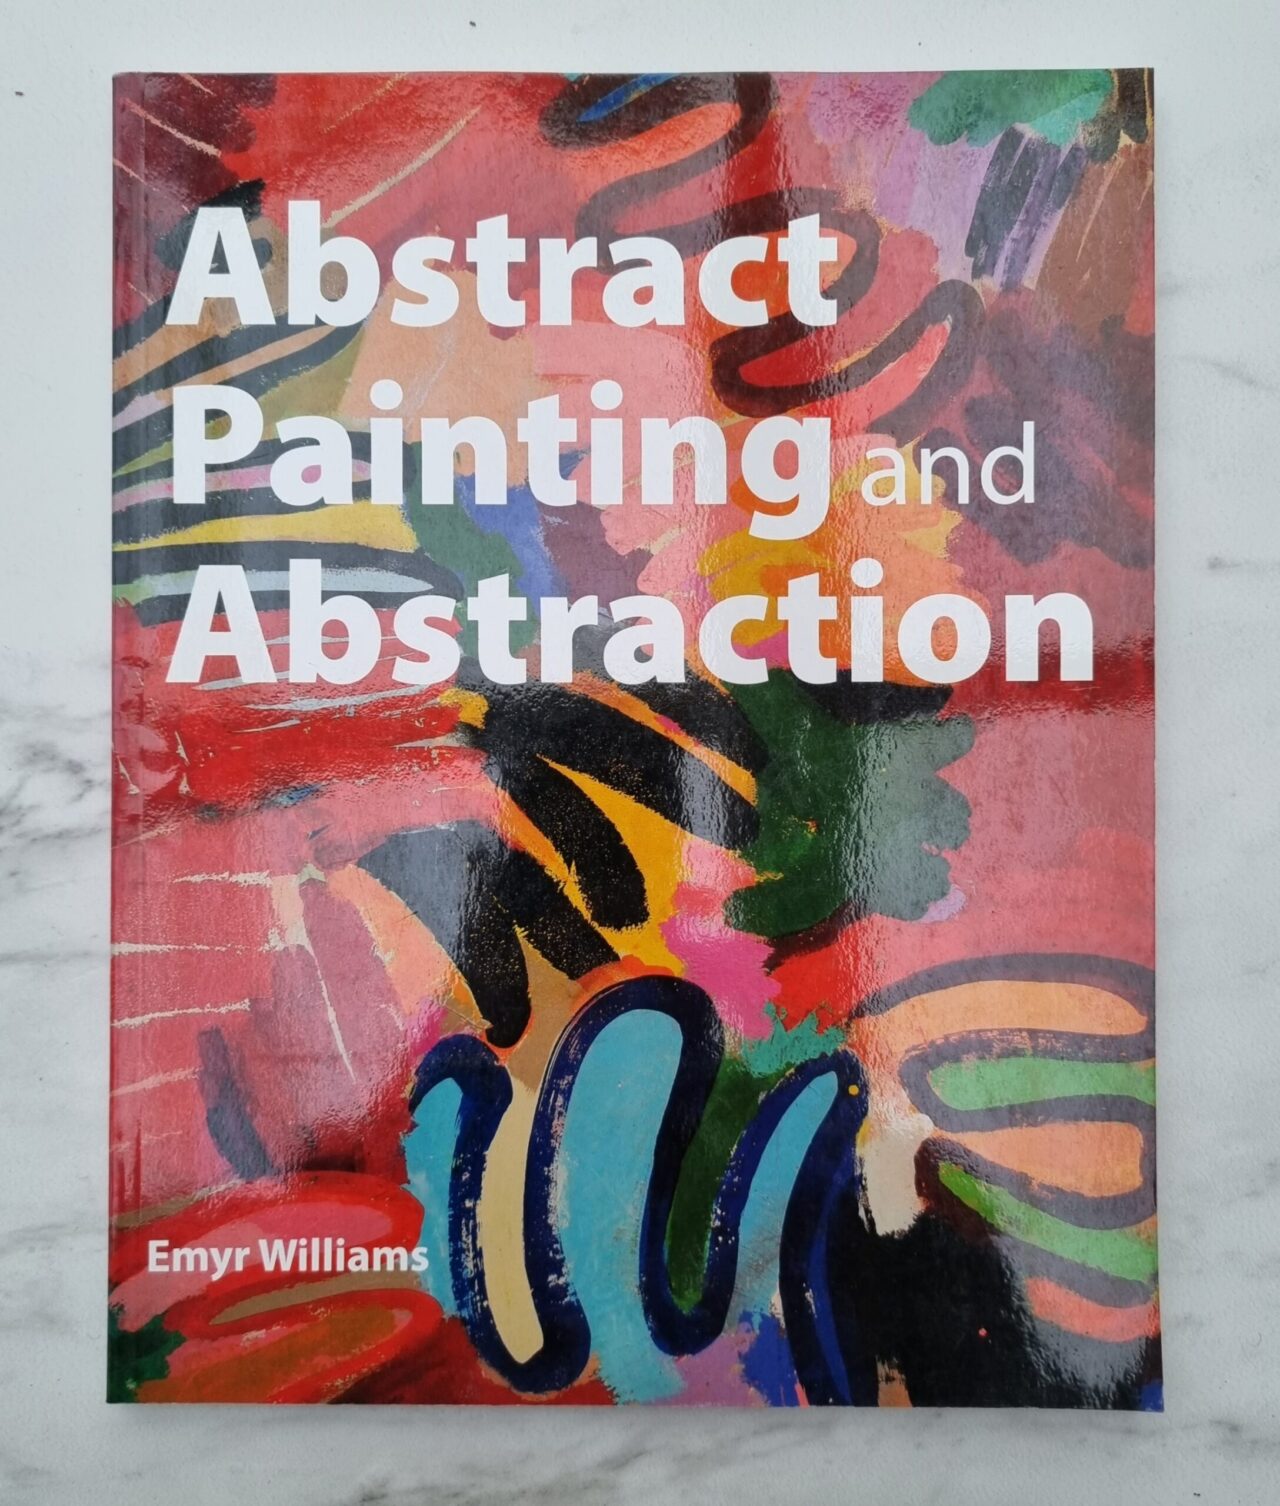 Abstract painting and abstraction